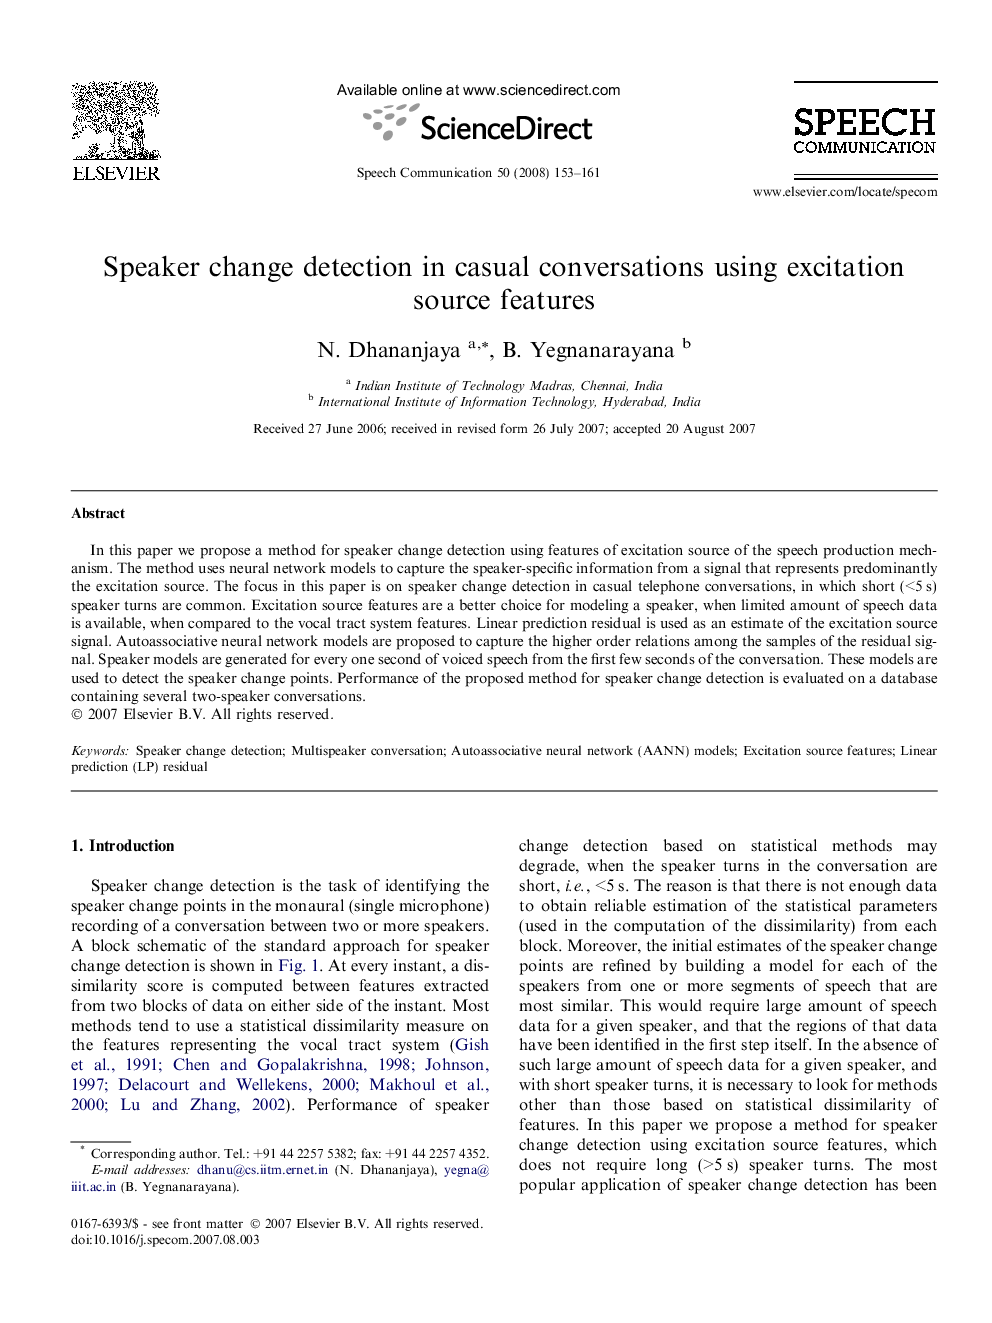 Speaker change detection in casual conversations using excitation source features